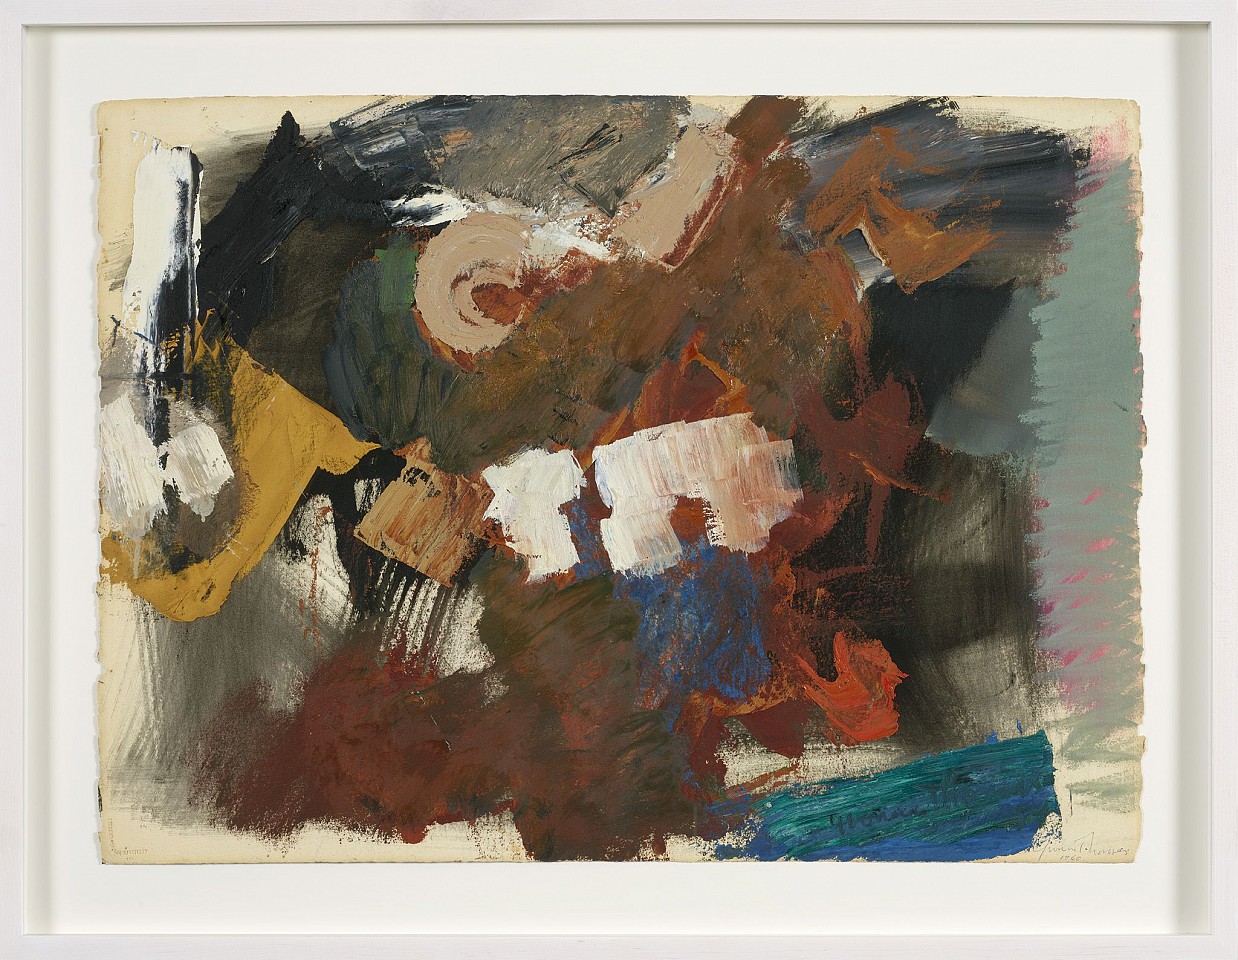 Yvonne Thomas, Untitled, 1960
Oil on paper, 22 1/2 x 30 1/2 in. (57.1 x 77.5 cm)
THO-00242